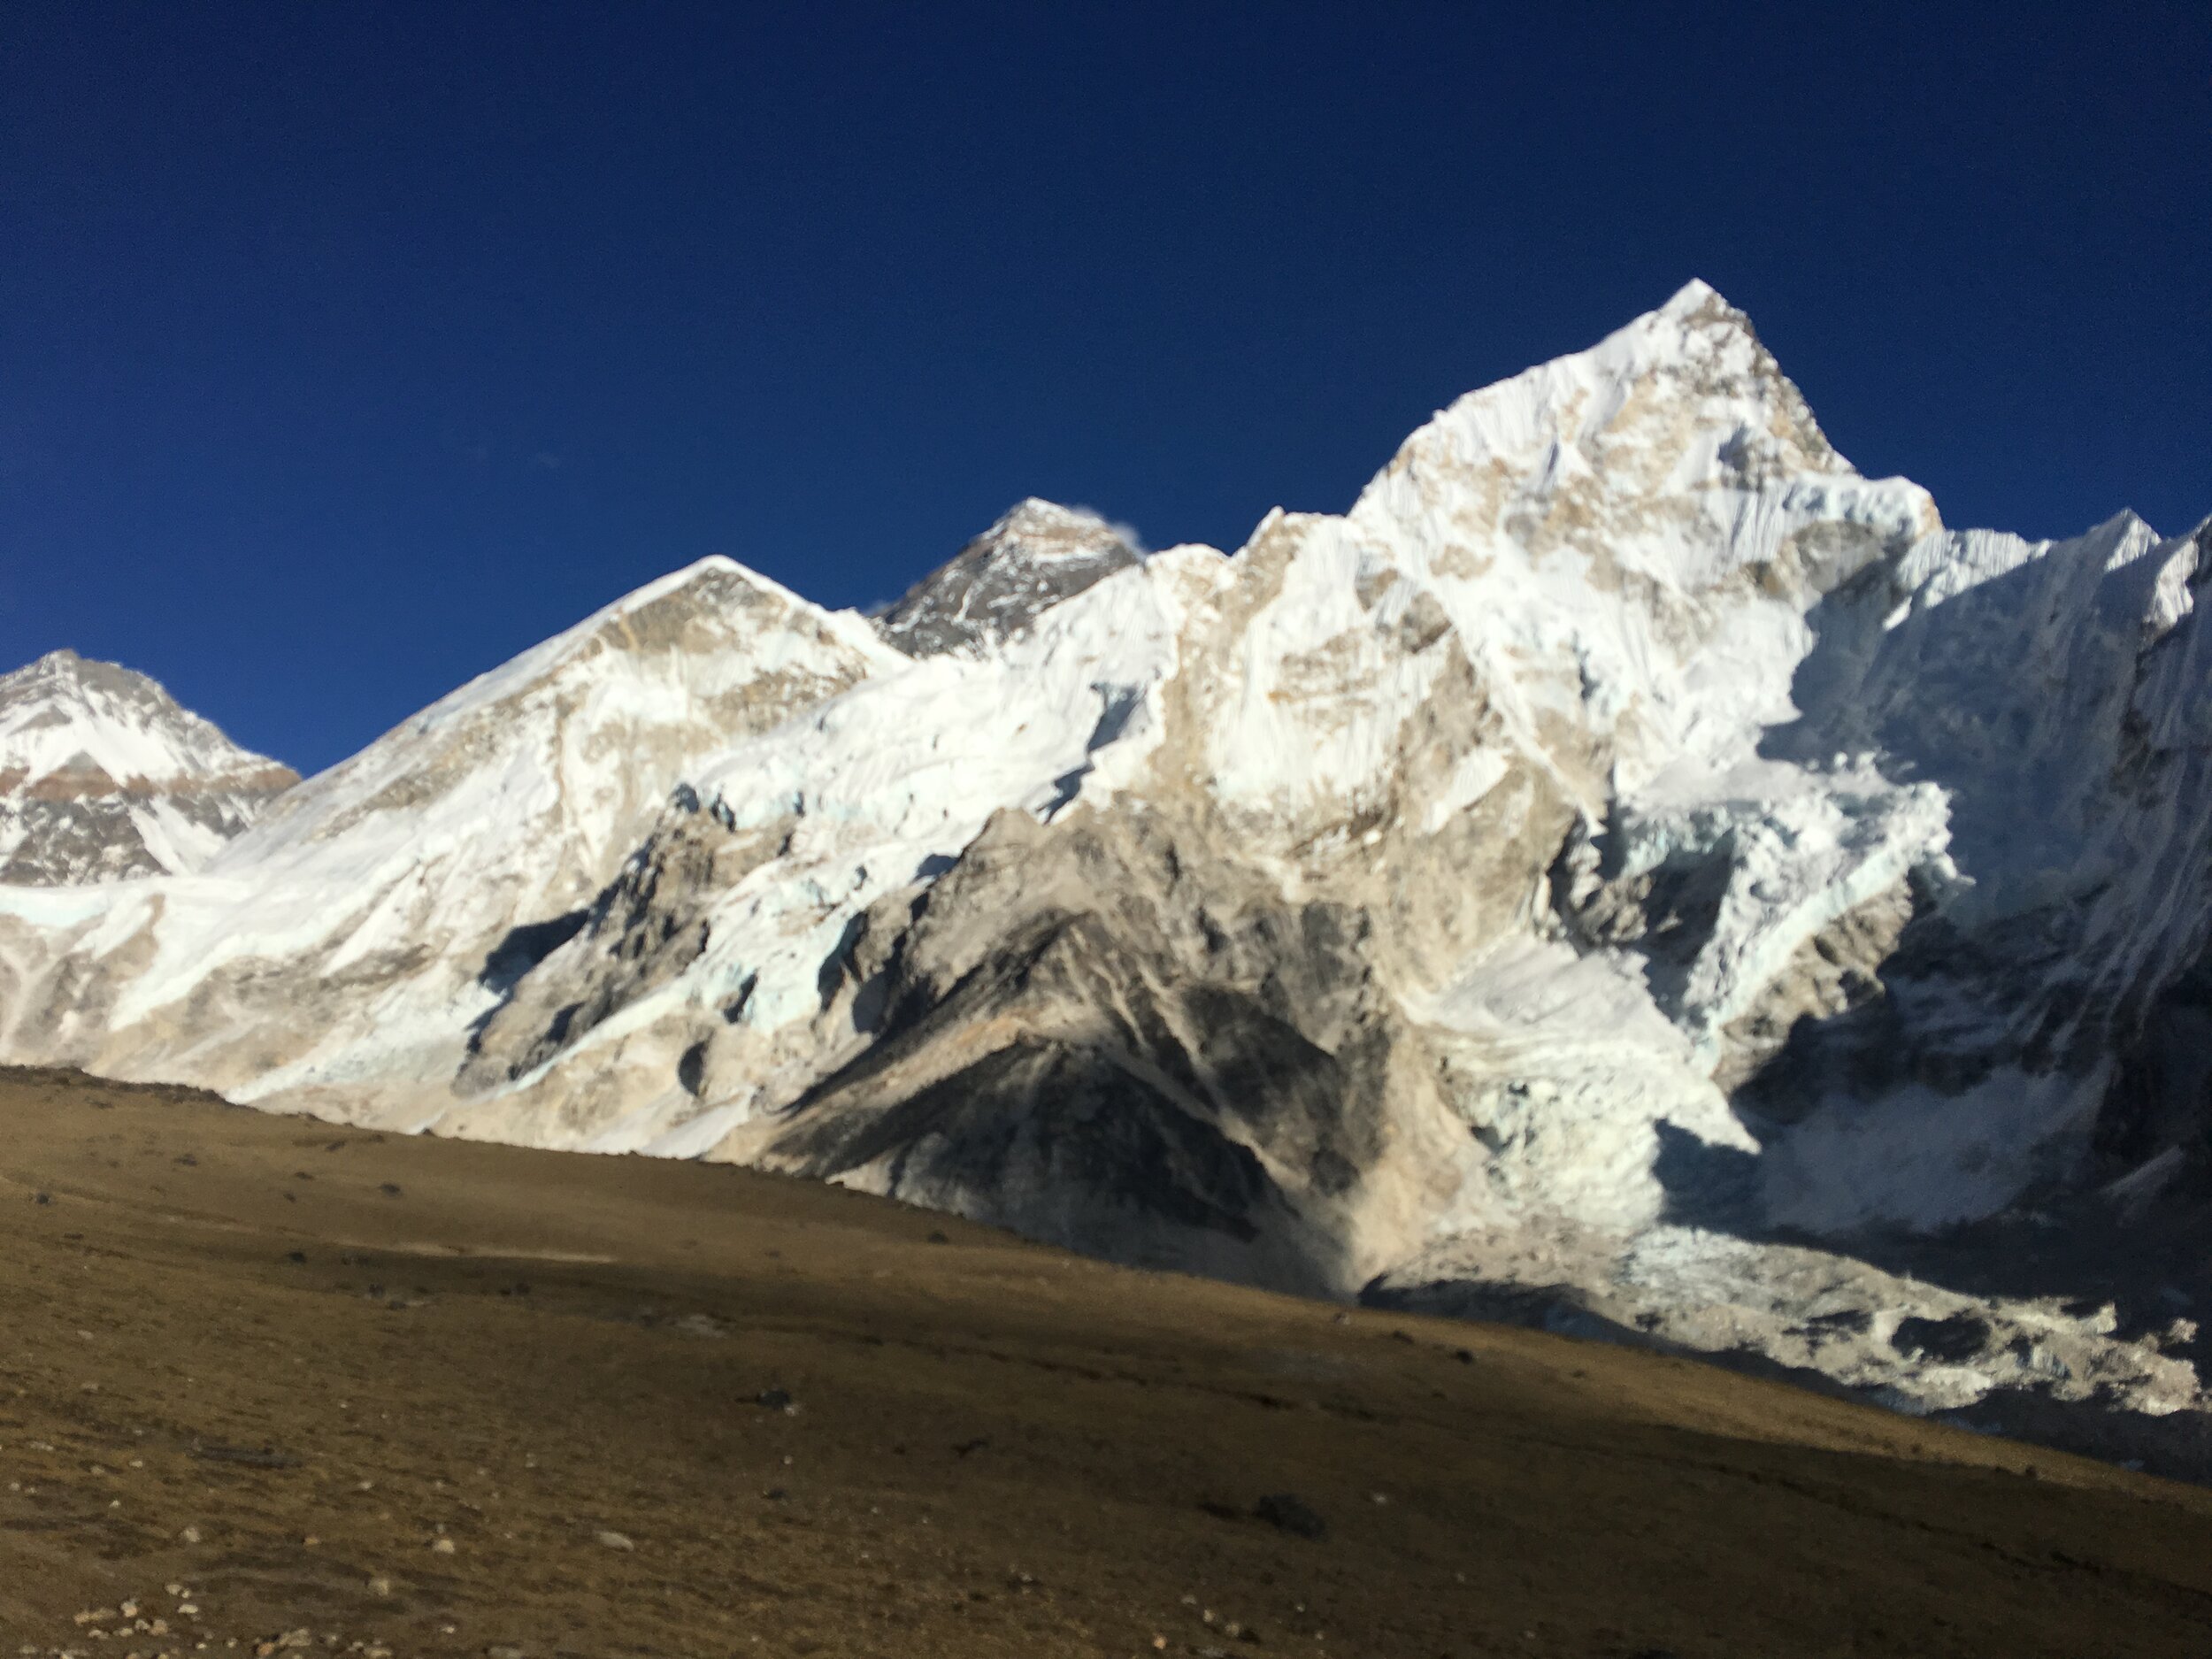 Everest from Kalapattar